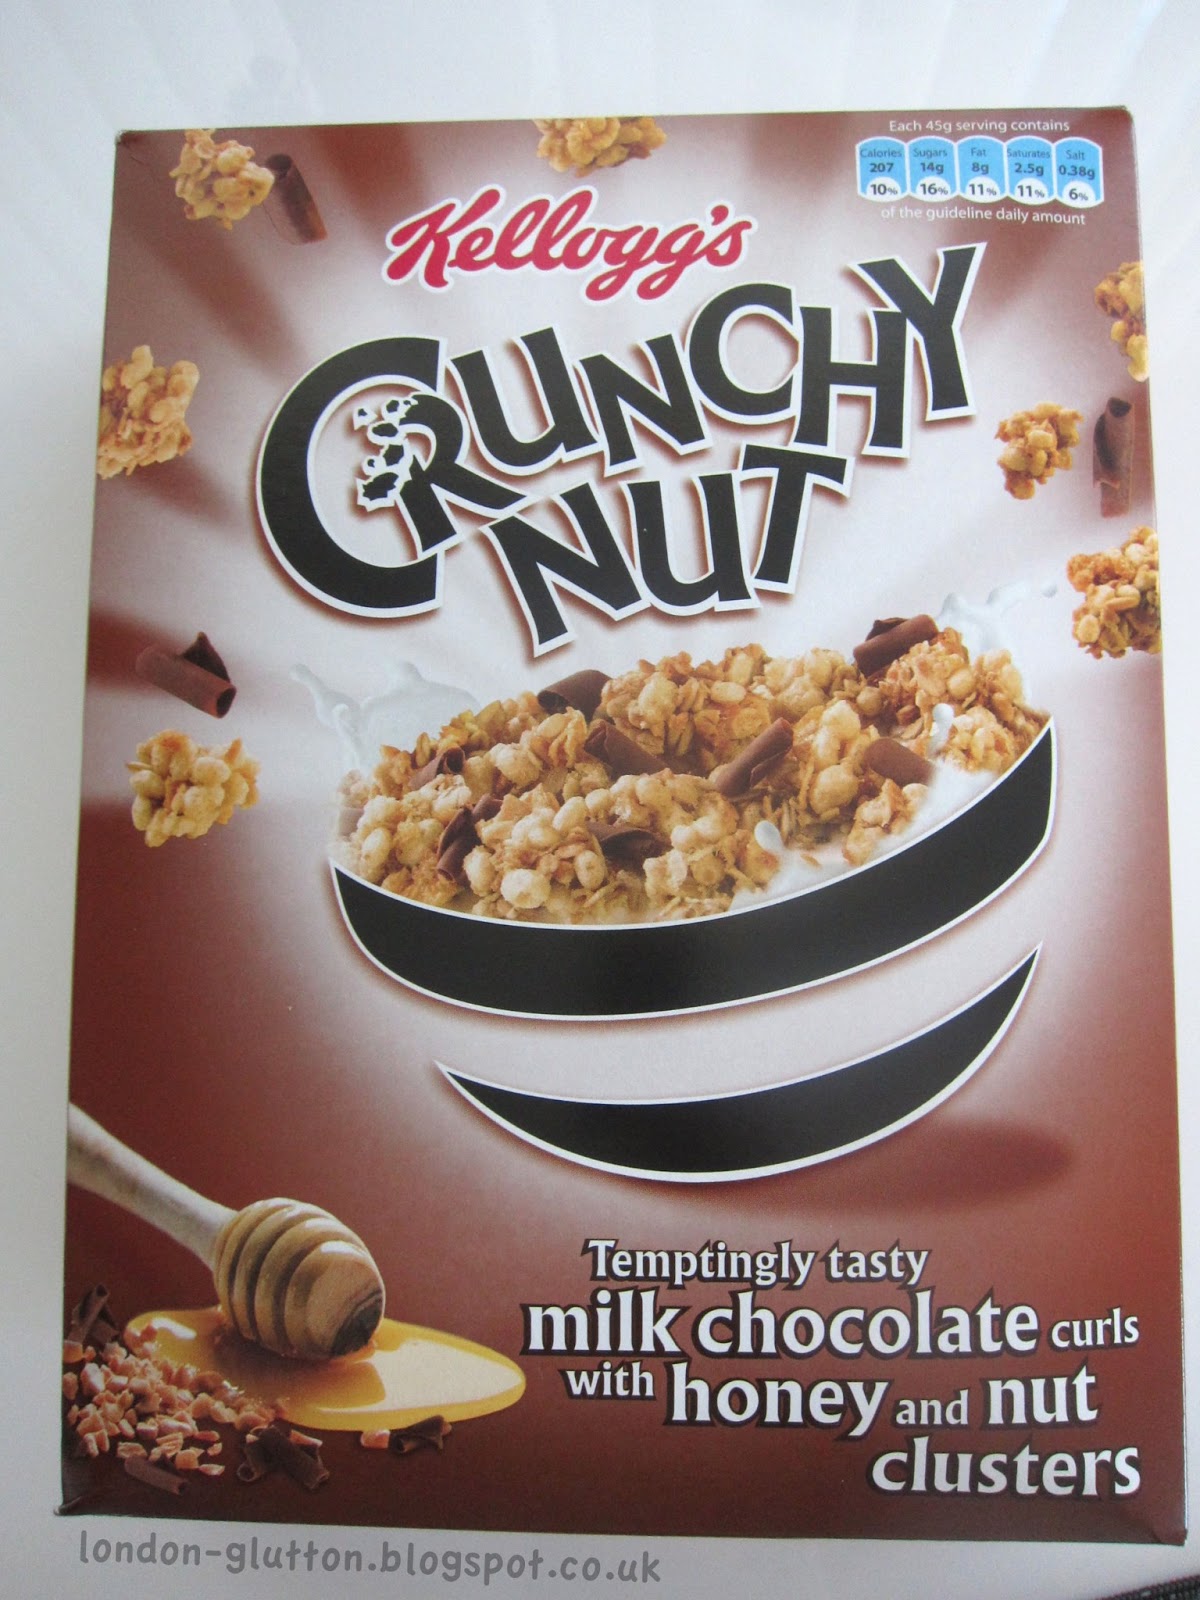 A glutton in London: Crunchy Nut Clusters with milk chocolate